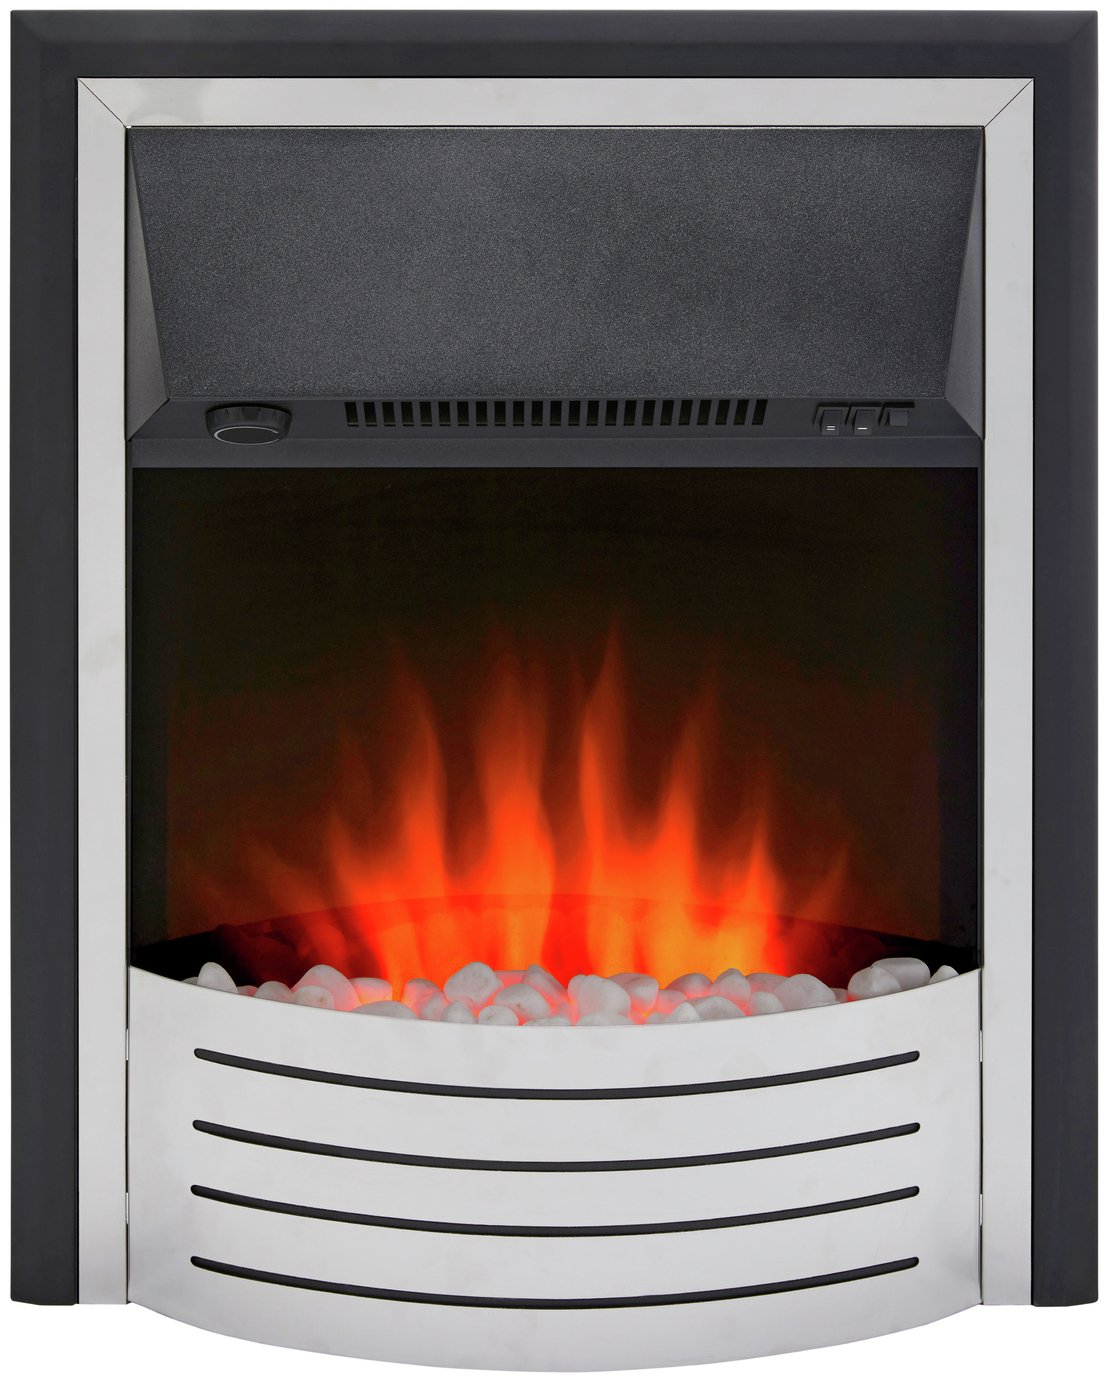 Glen Fulford 2kW Contemporary Inset Fire - Stainless Steel